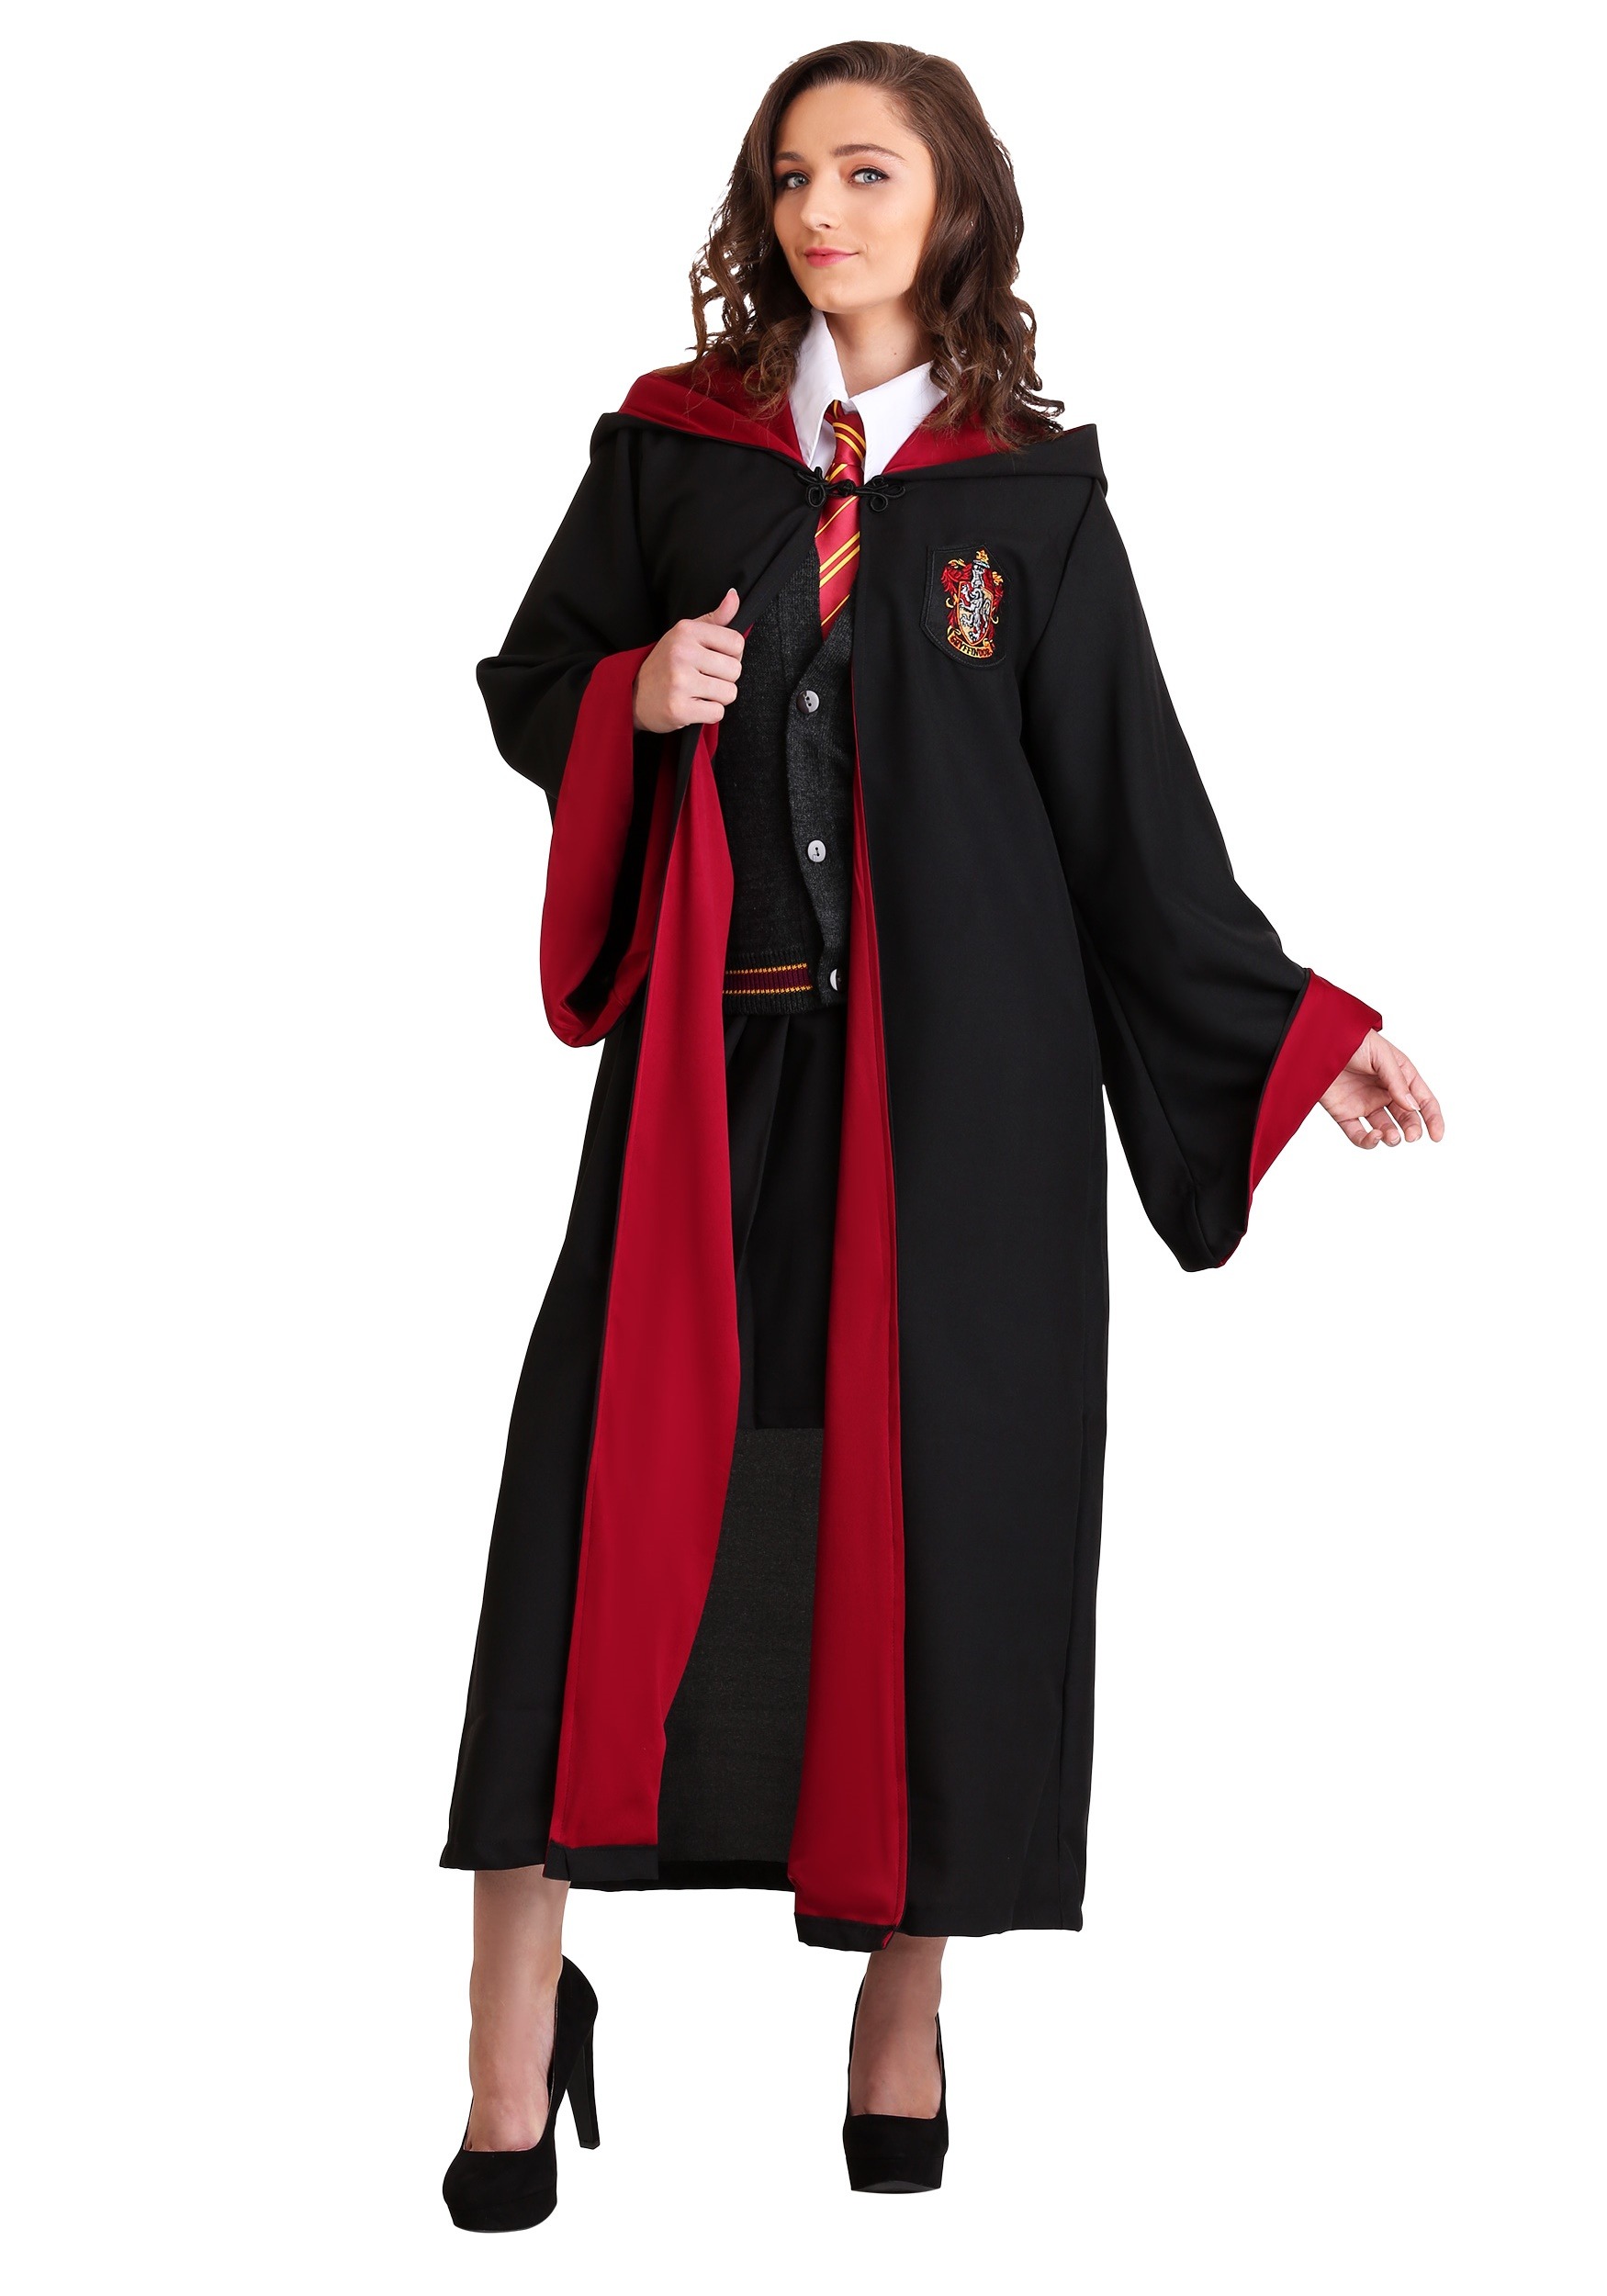 Hermione Plus Size Costume for Women